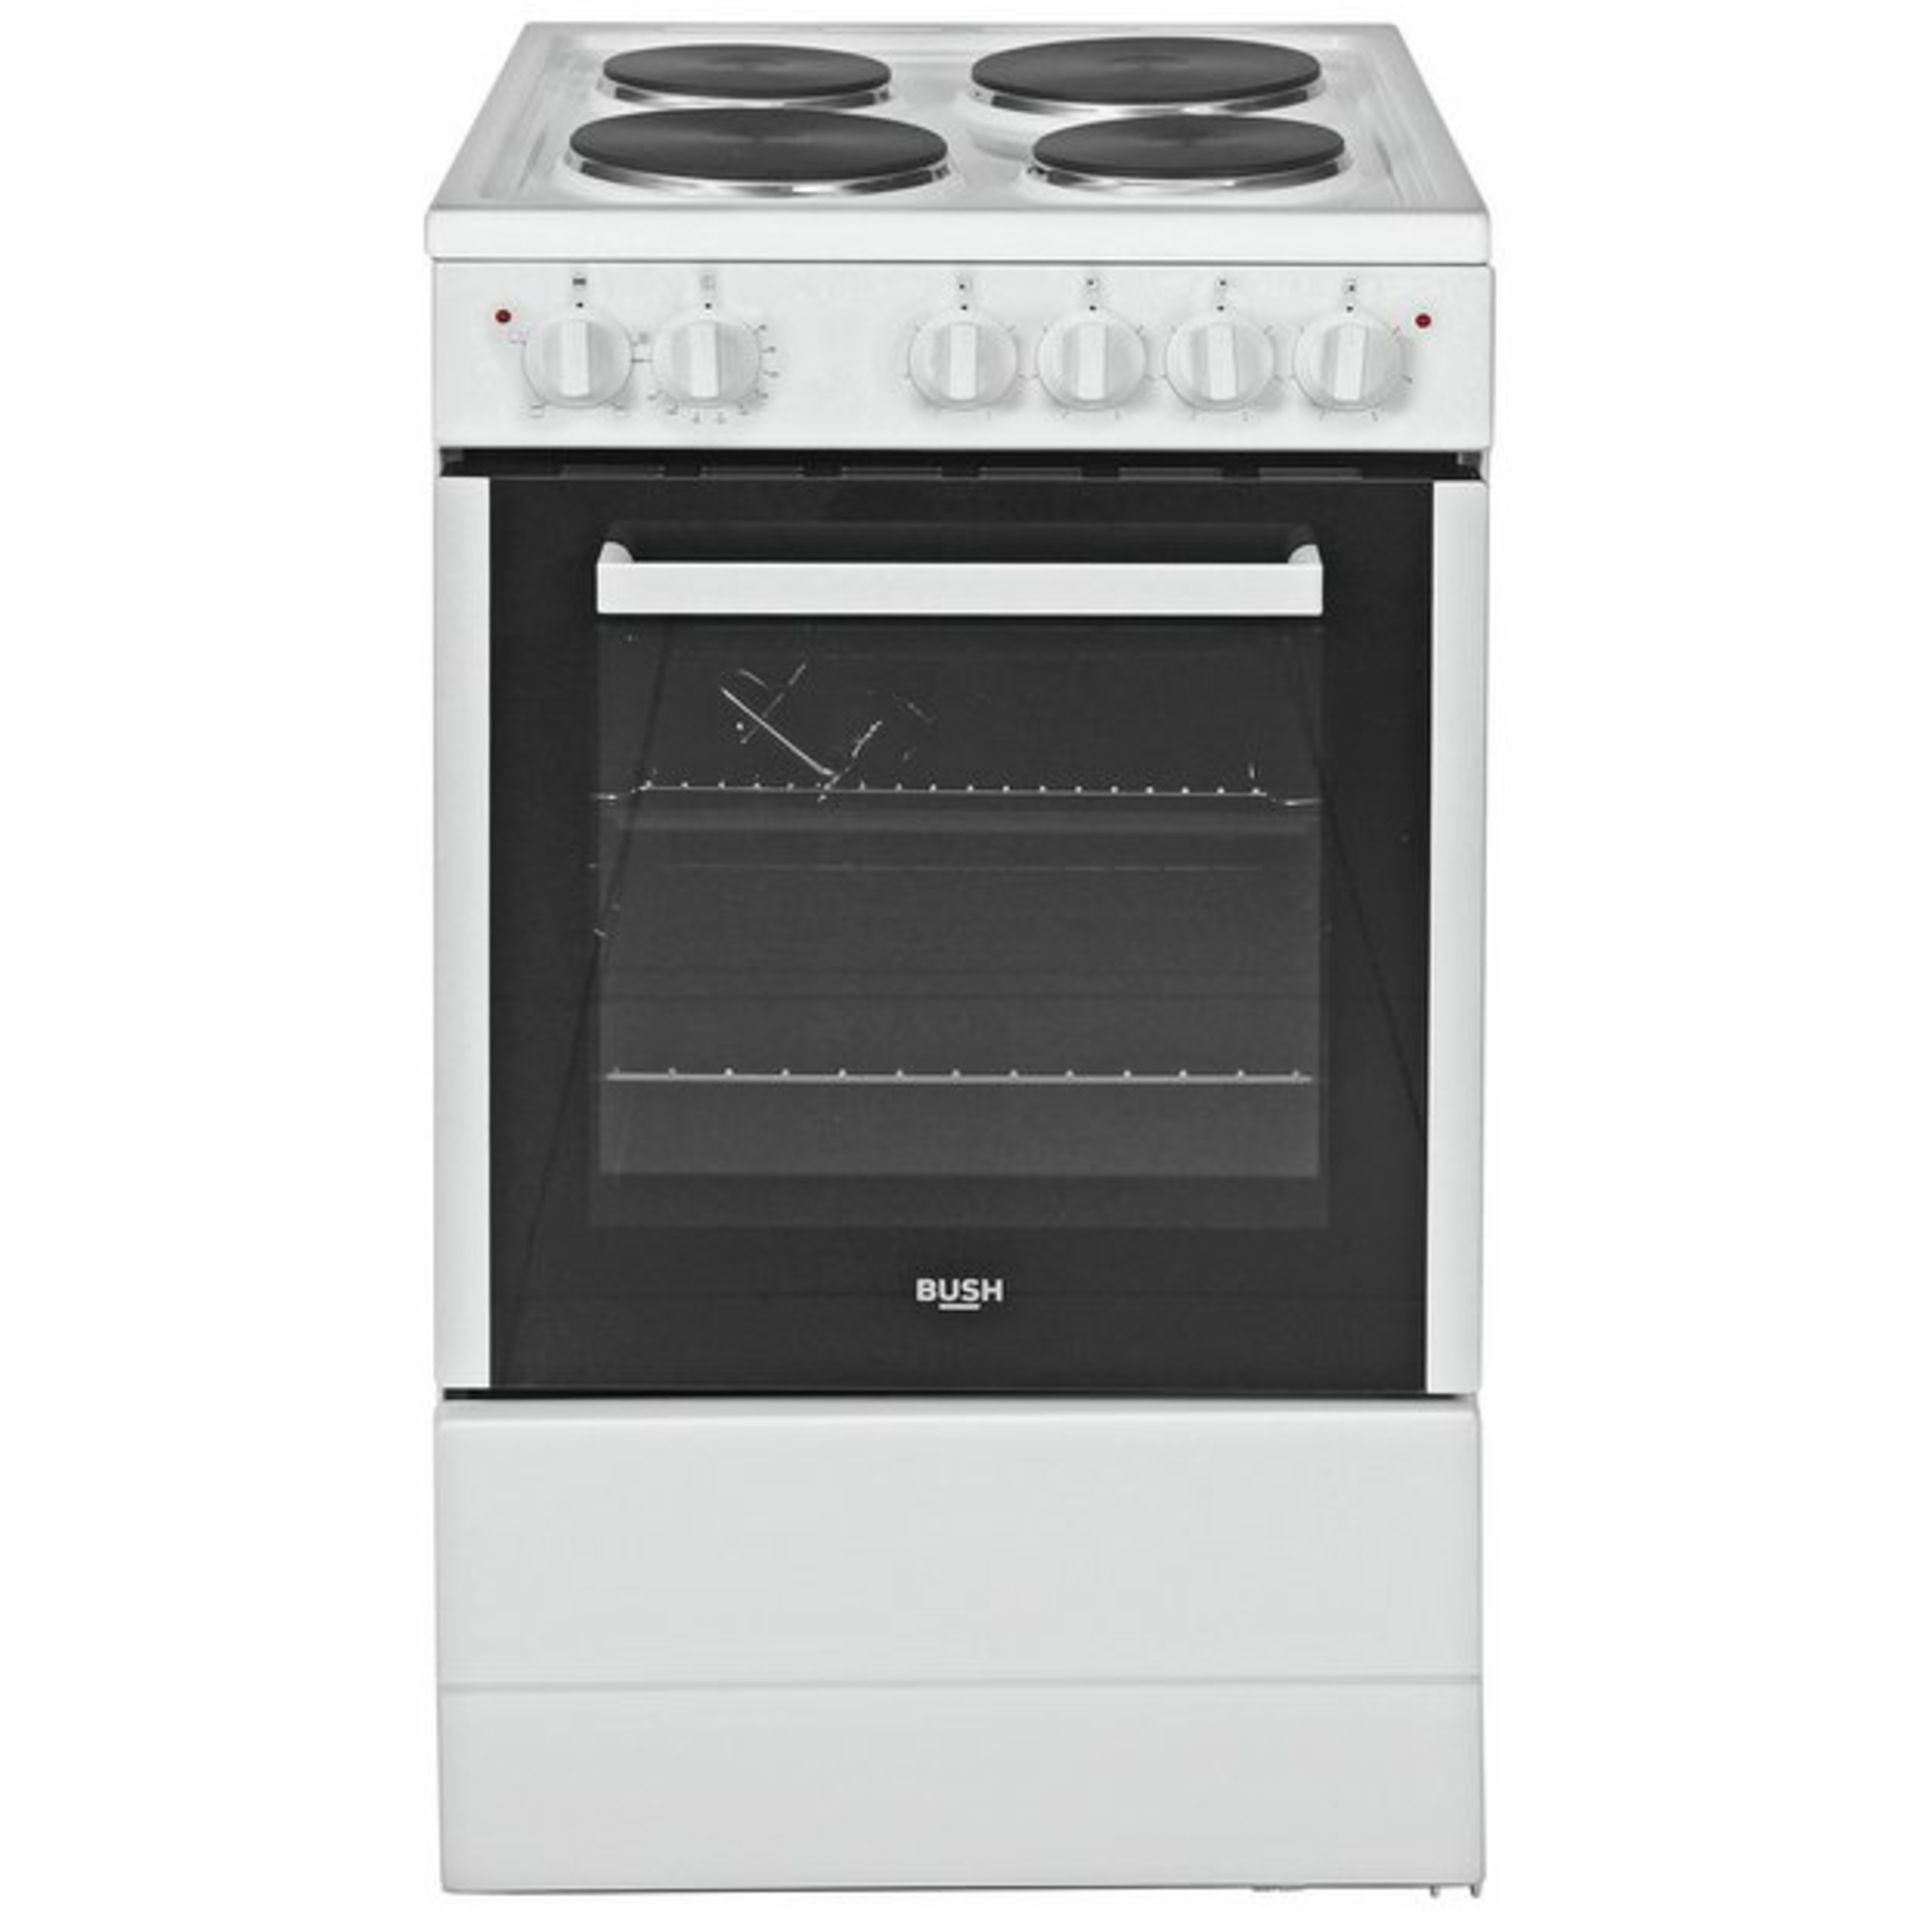 + VAT Grade A/B Bush BESAW50W 50cm Single Electric Cooker - Oven Capacity 63 Litre - Solid Plate